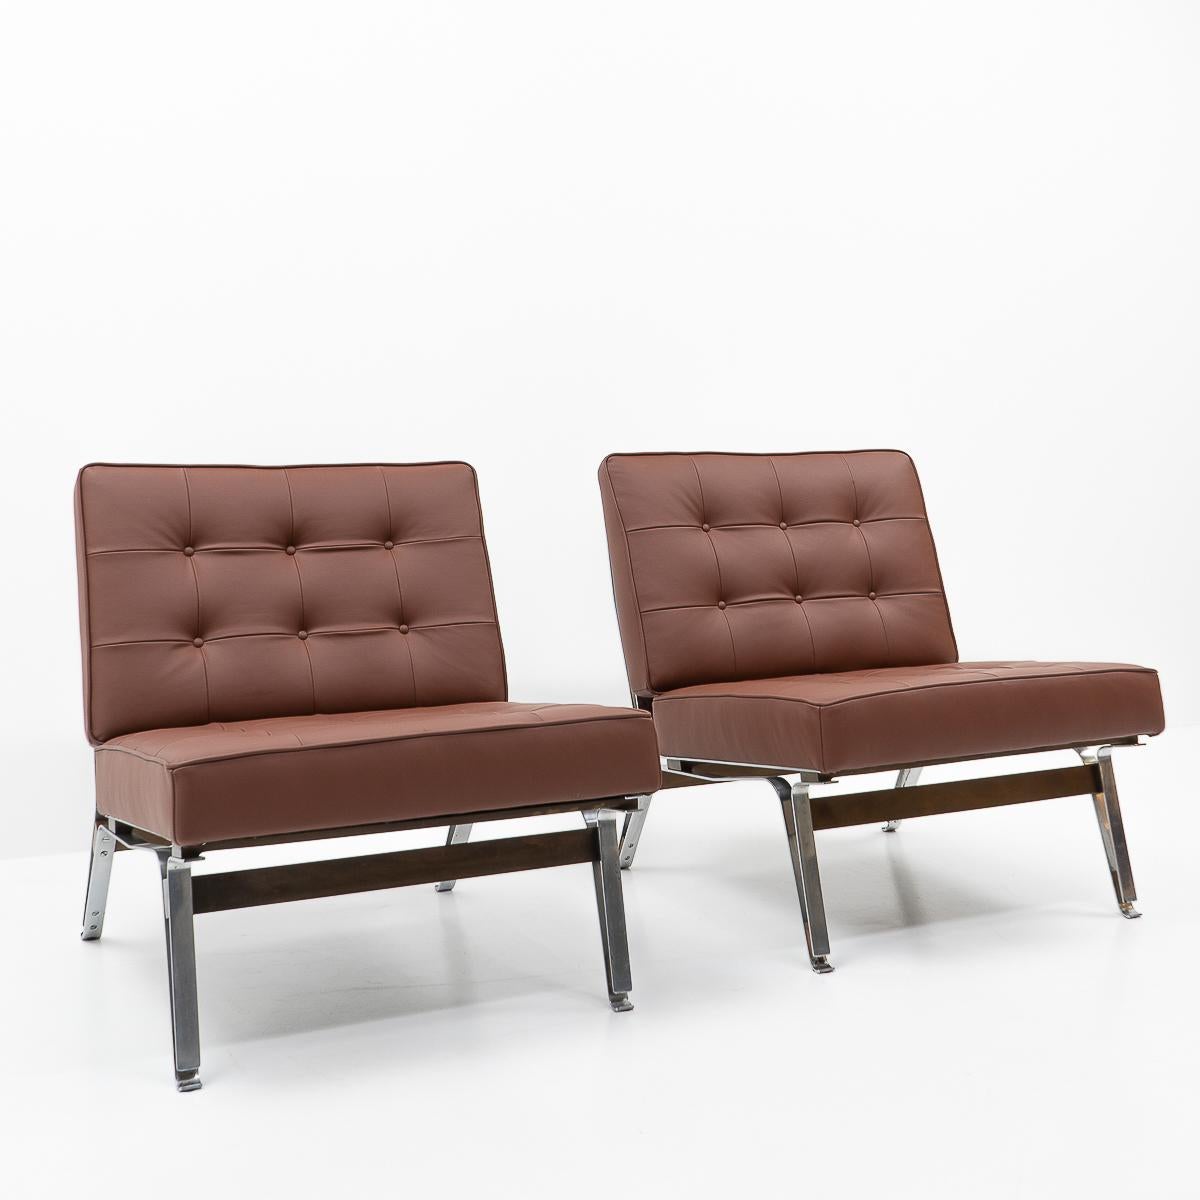 A pair of “856” lounge chairs by Ico Parisi for Cassina, produced during the 1950s in Italy. 

The chairs have been beautifully re-upholstered in new dark brown semi-aniline leather, while ensuring the original style of the pillows was maintained.